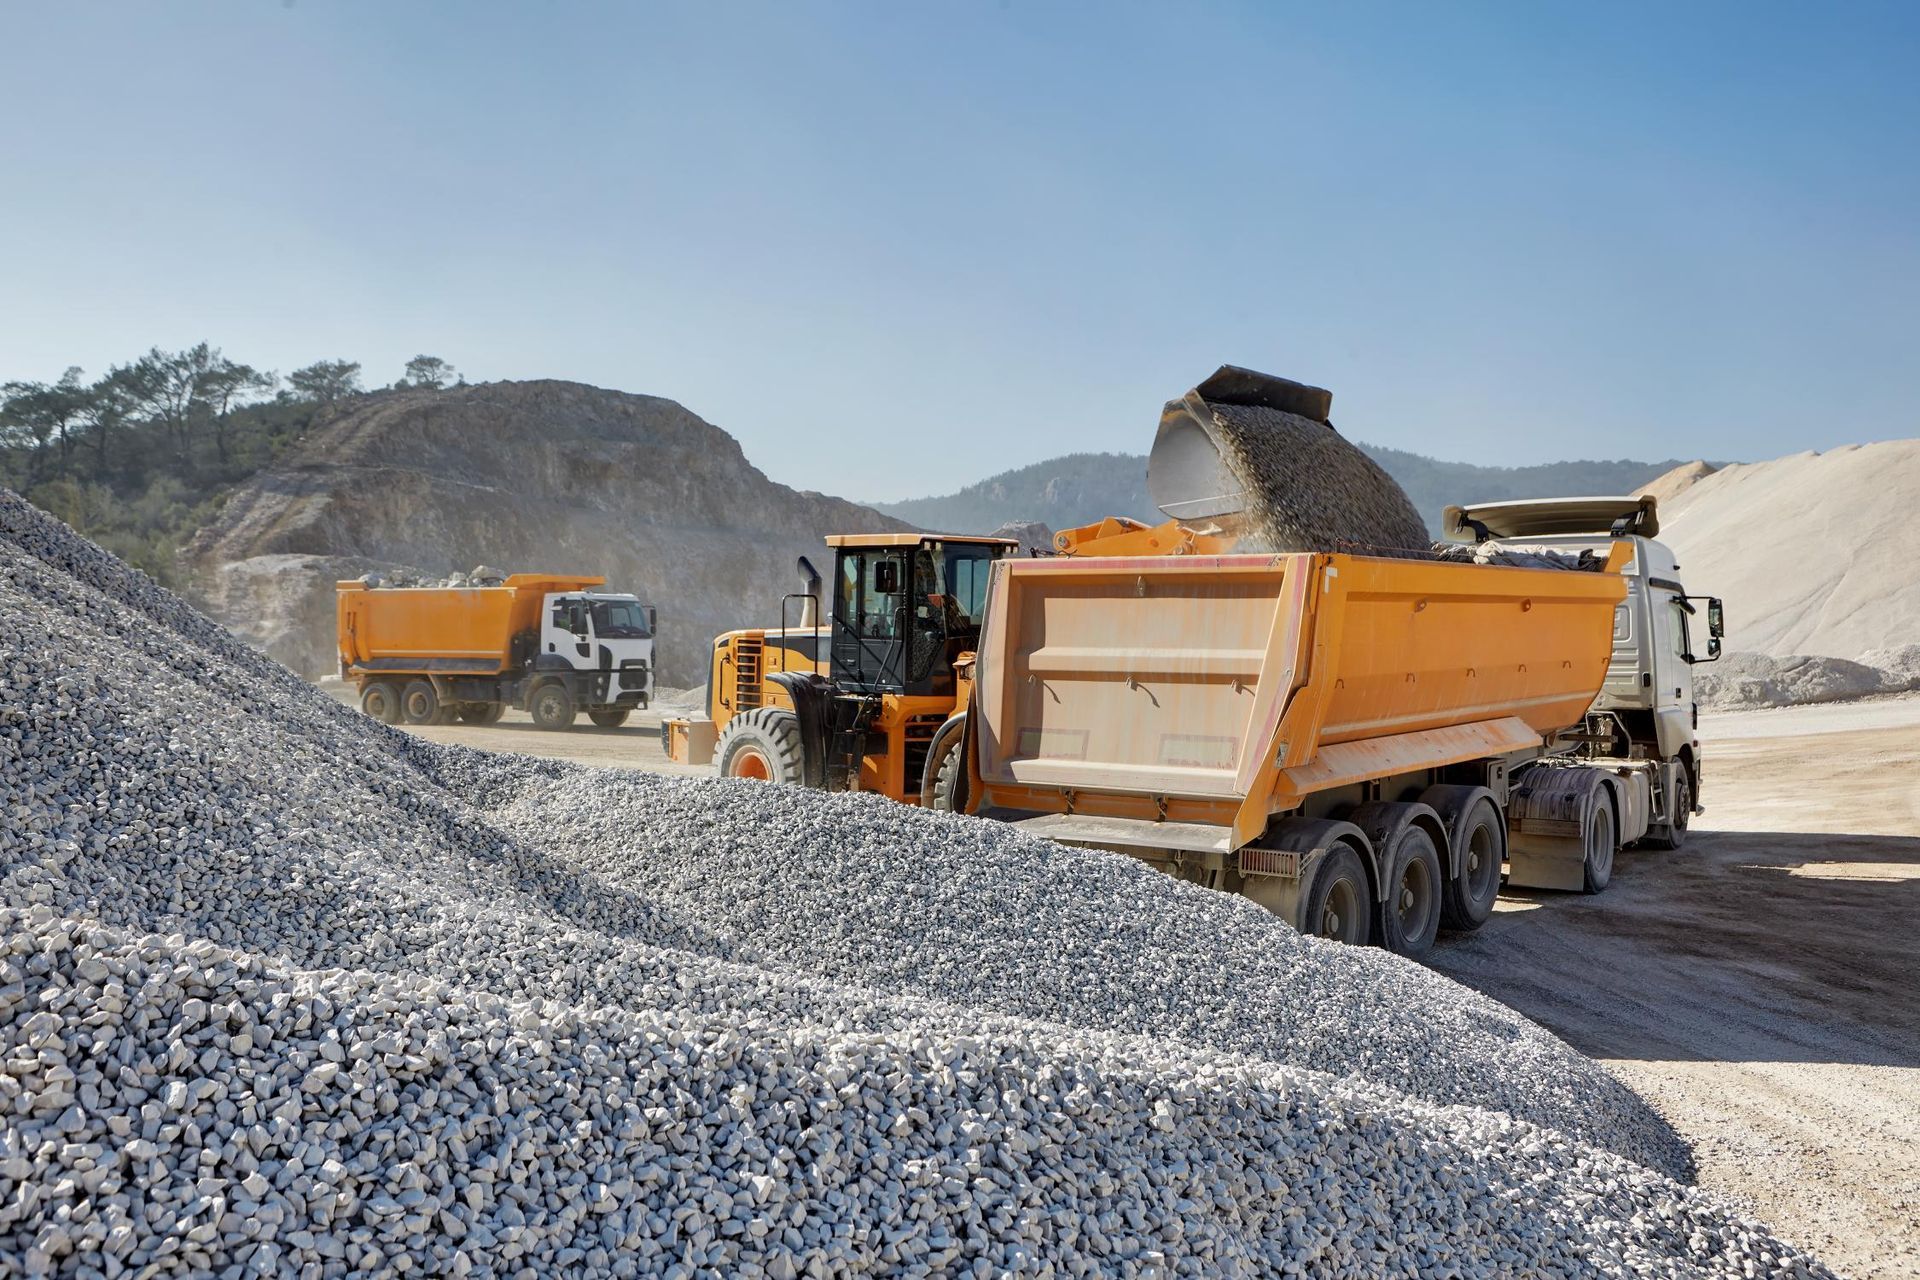 A dump truck is being loaded with gravel in a quarry.